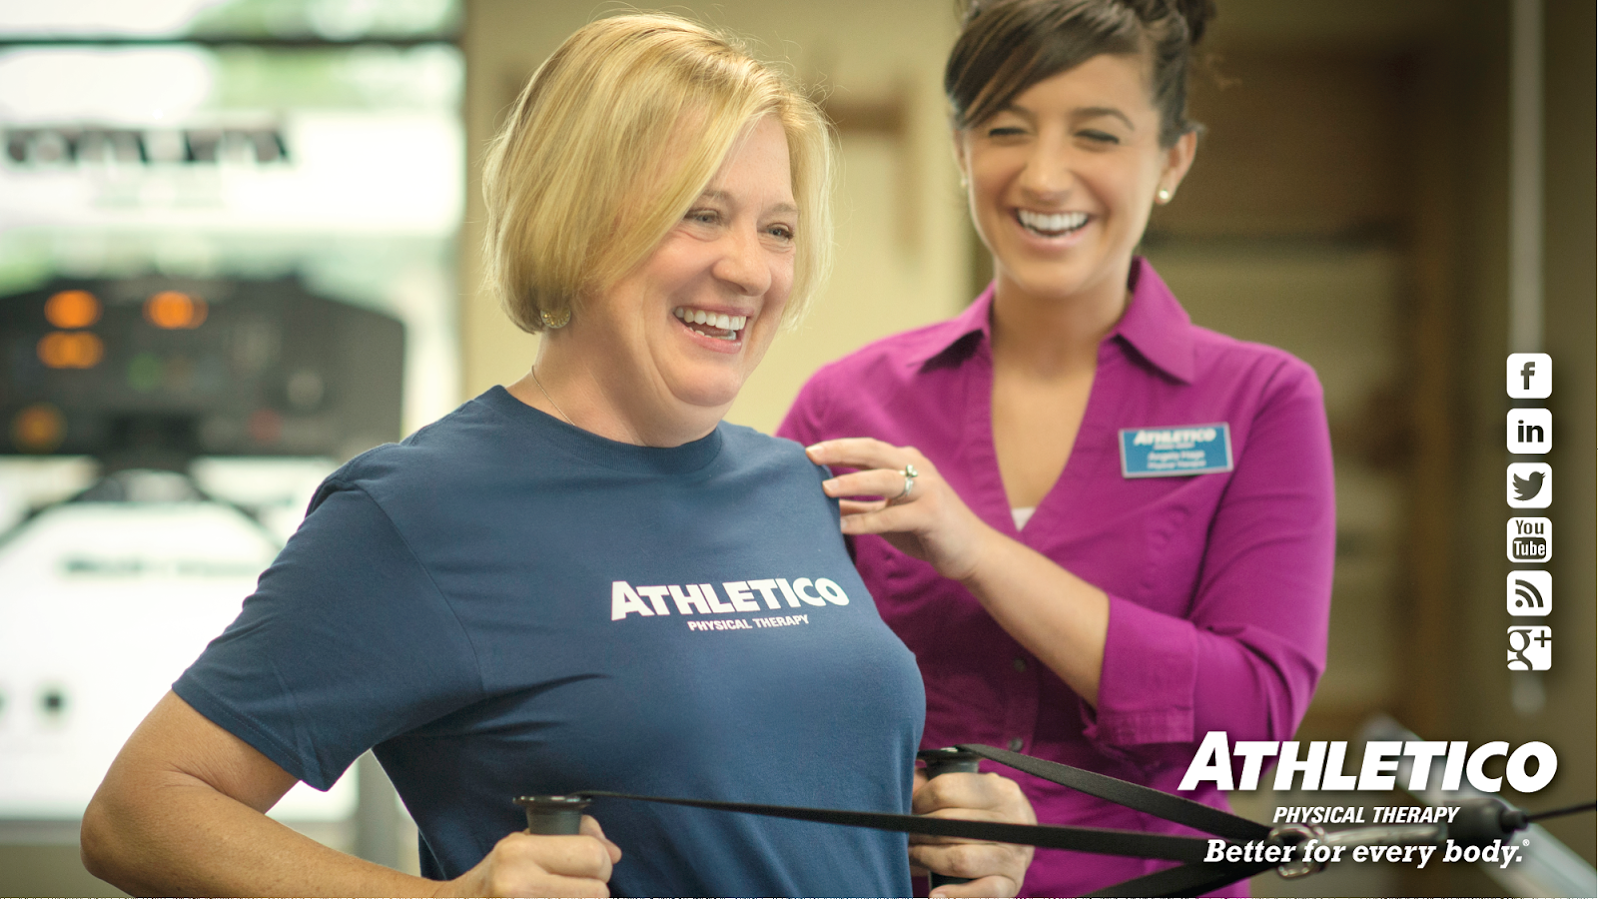 Athletico Physical Therapy - St. Marys 476 Fortman Dr, St Marys Ohio 45885